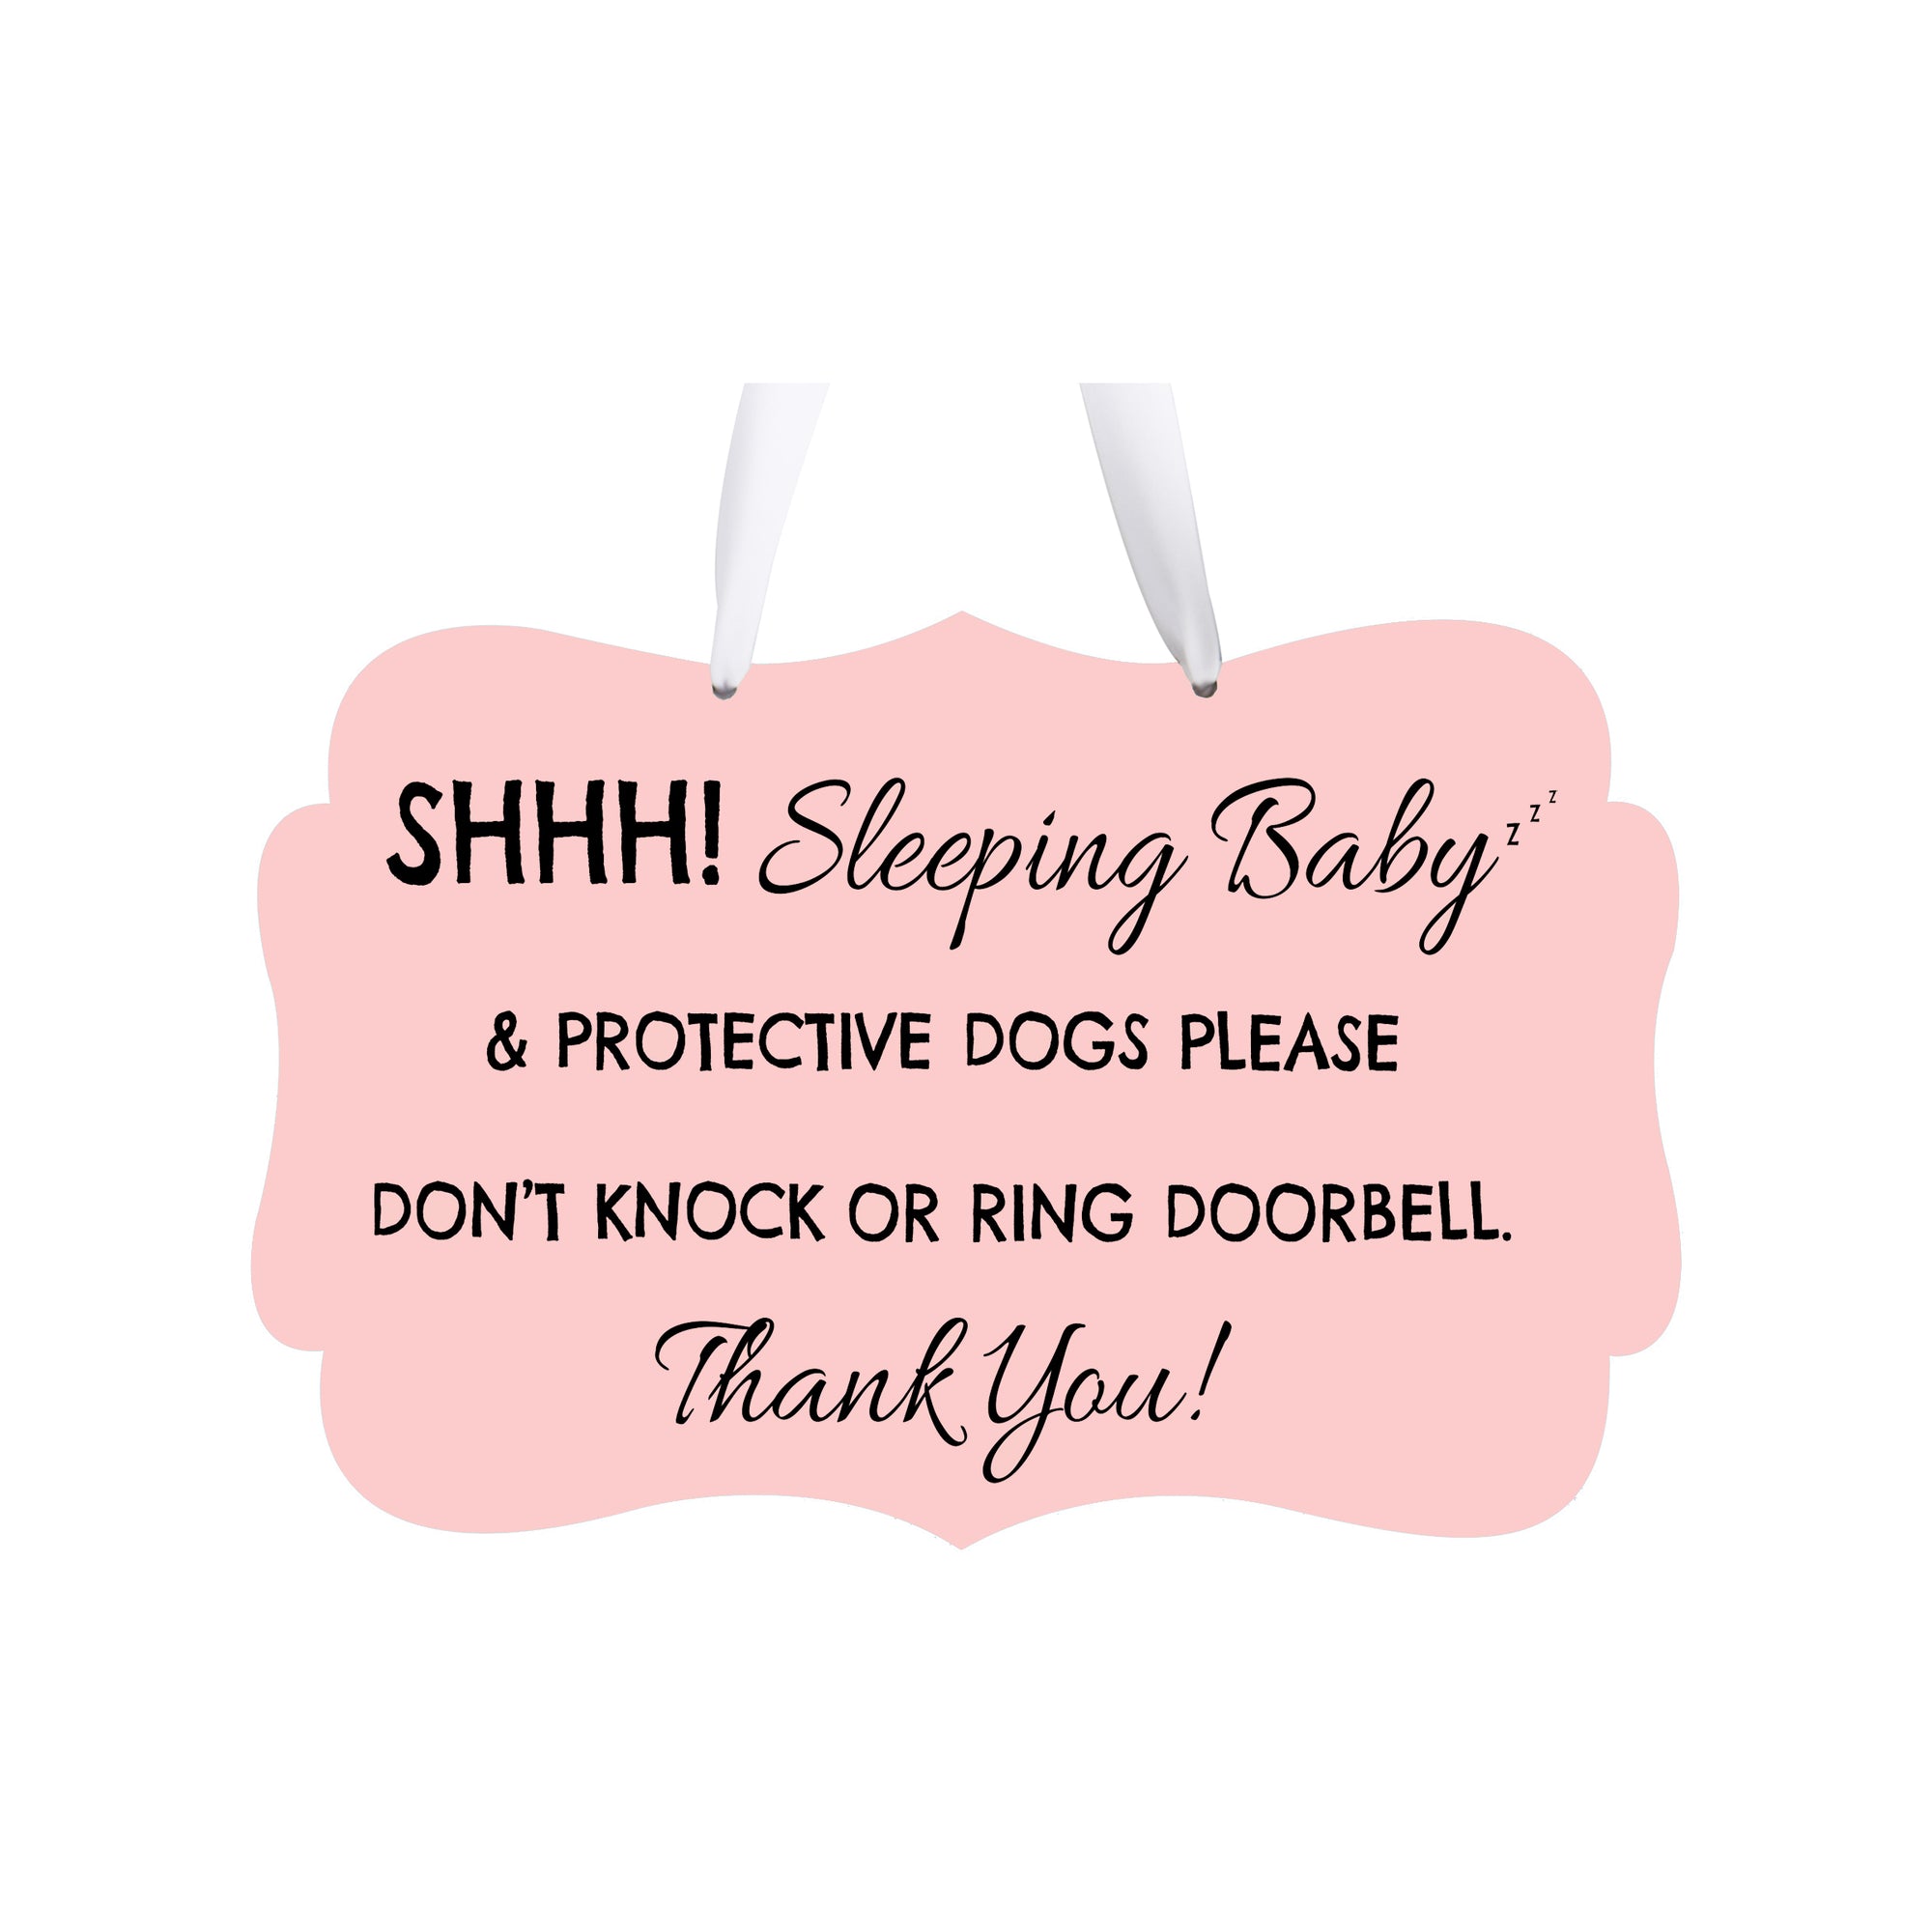 LifeSong Milestones Sleeping Baby Protective Puppies Rope Hanging Sign for Front Door - Do Not Knock or Ring Doorbell - Quiet Entry for House New Home Decor - 8x12